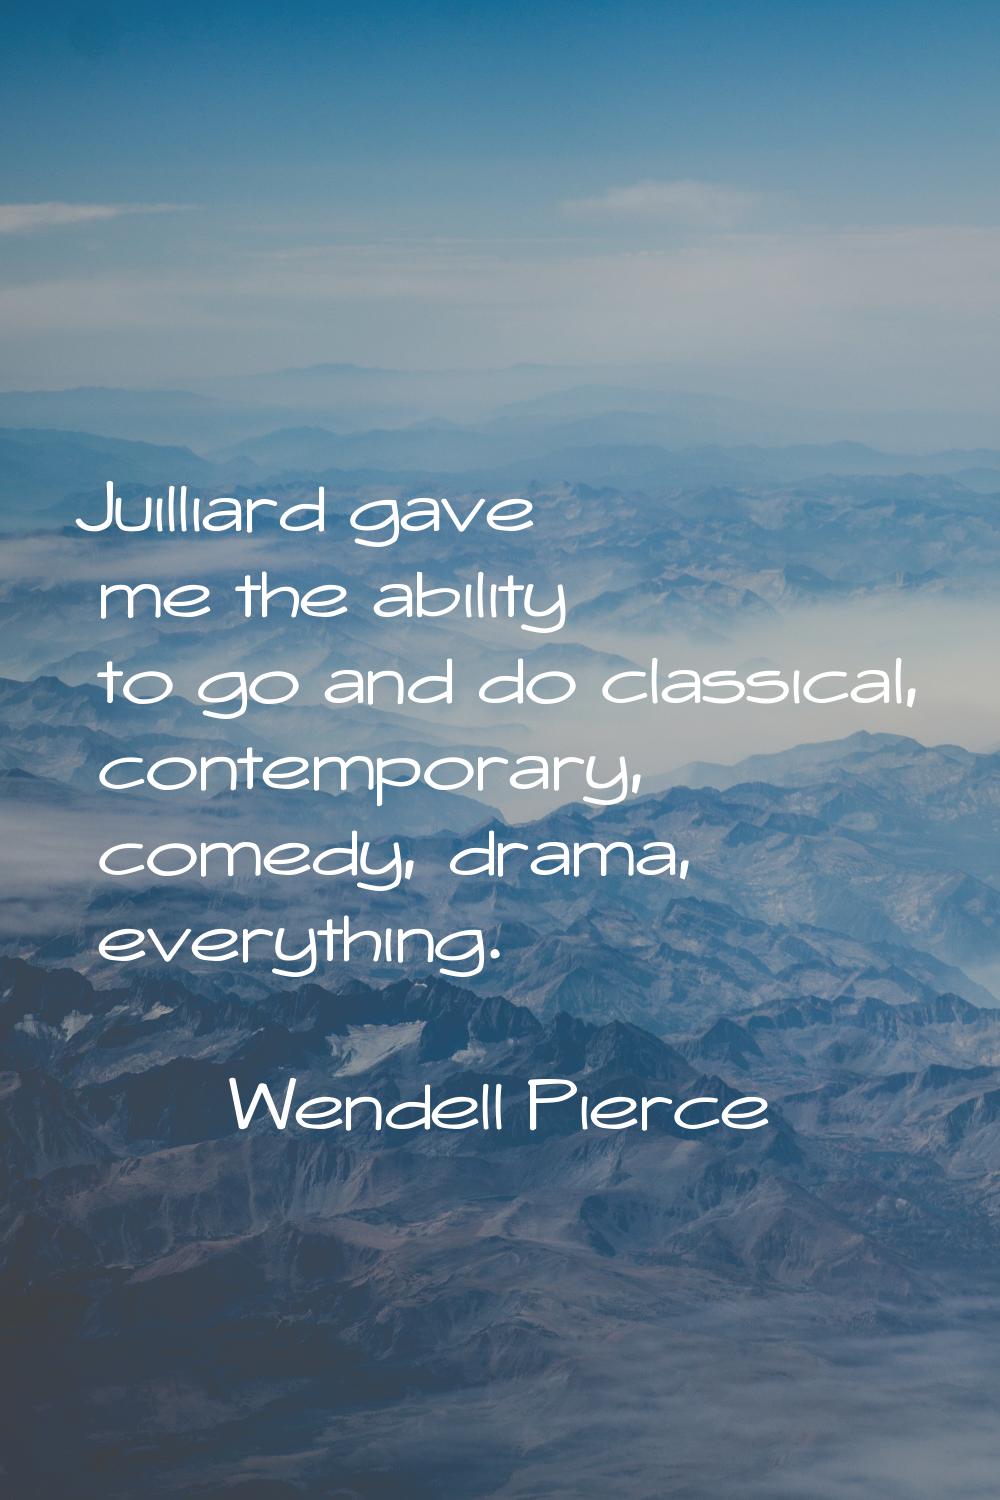 Juilliard gave me the ability to go and do classical, contemporary, comedy, drama, everything.